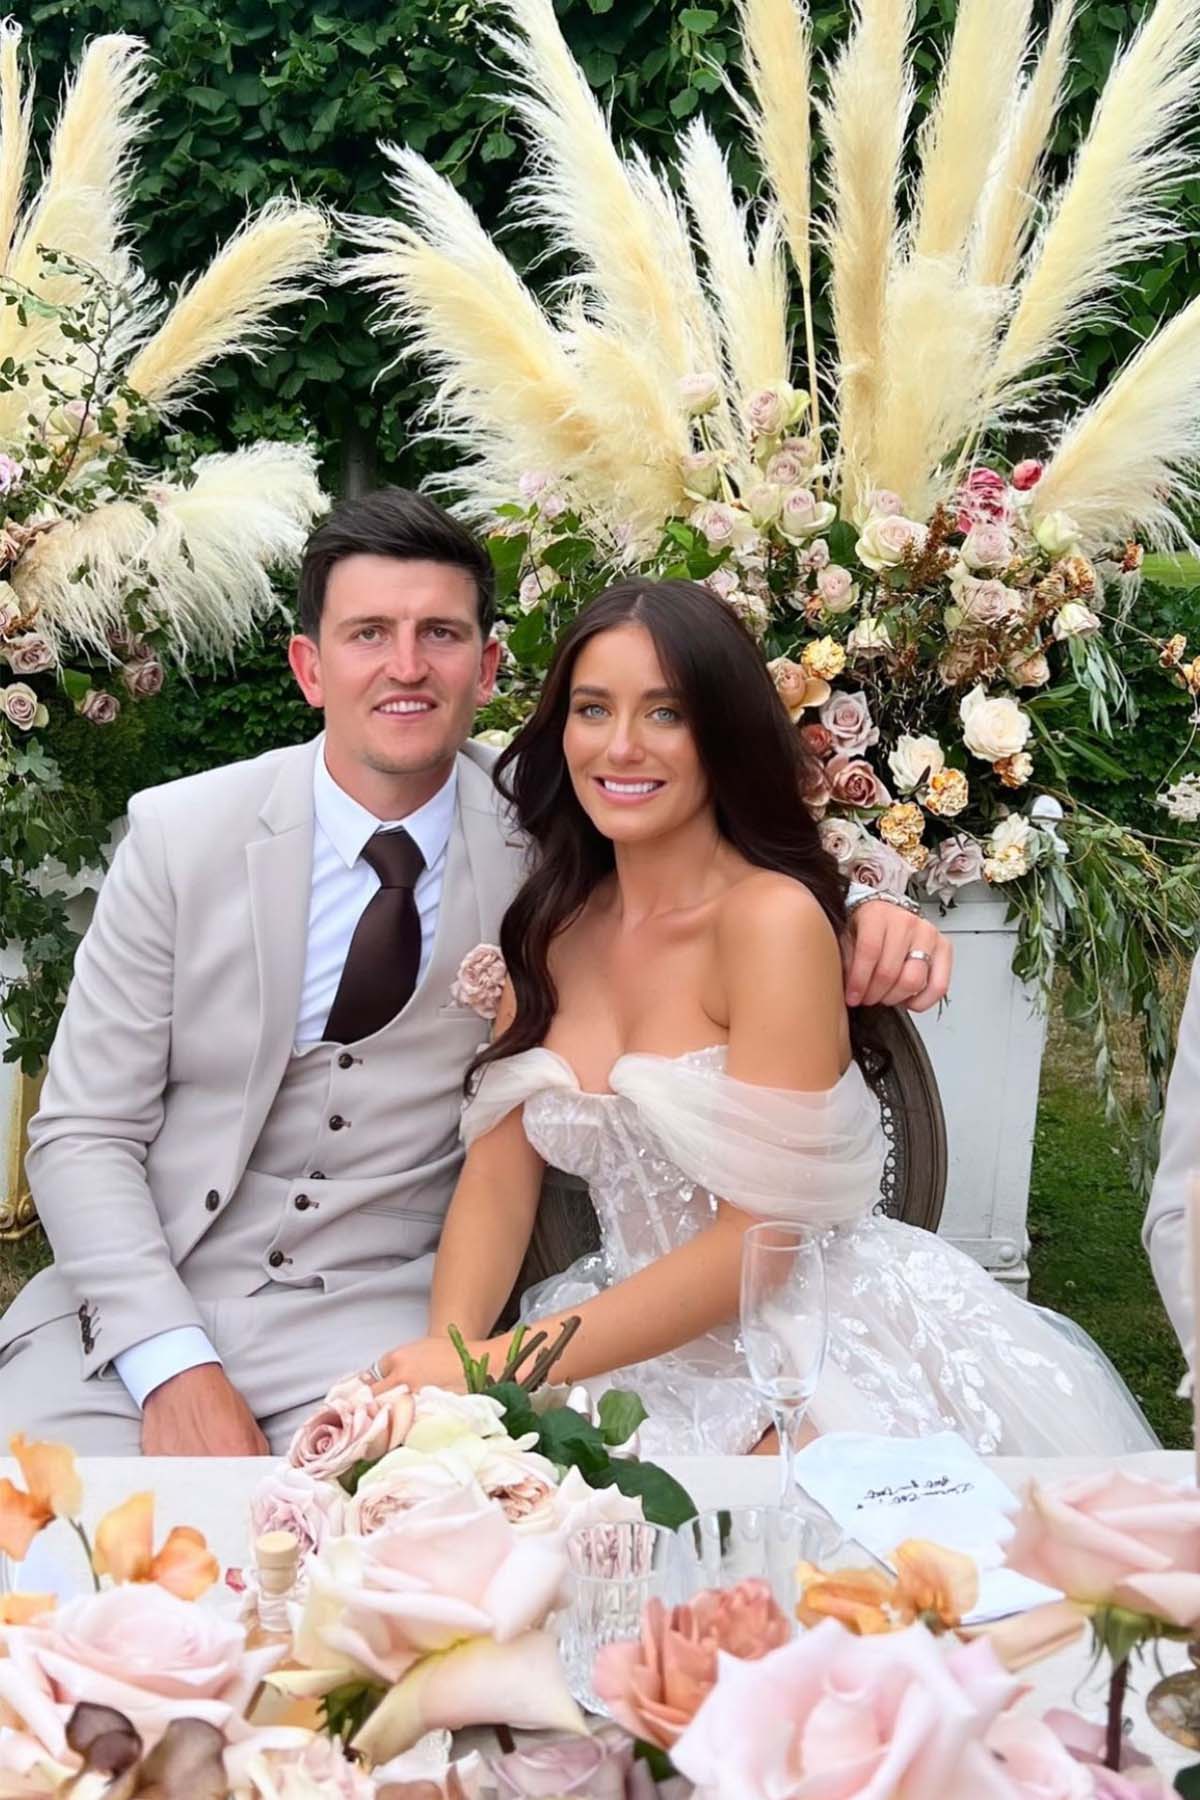 The Harry Maguire Wedding Suit - HM5 Stone Three Piece Suit – Marc Darcy